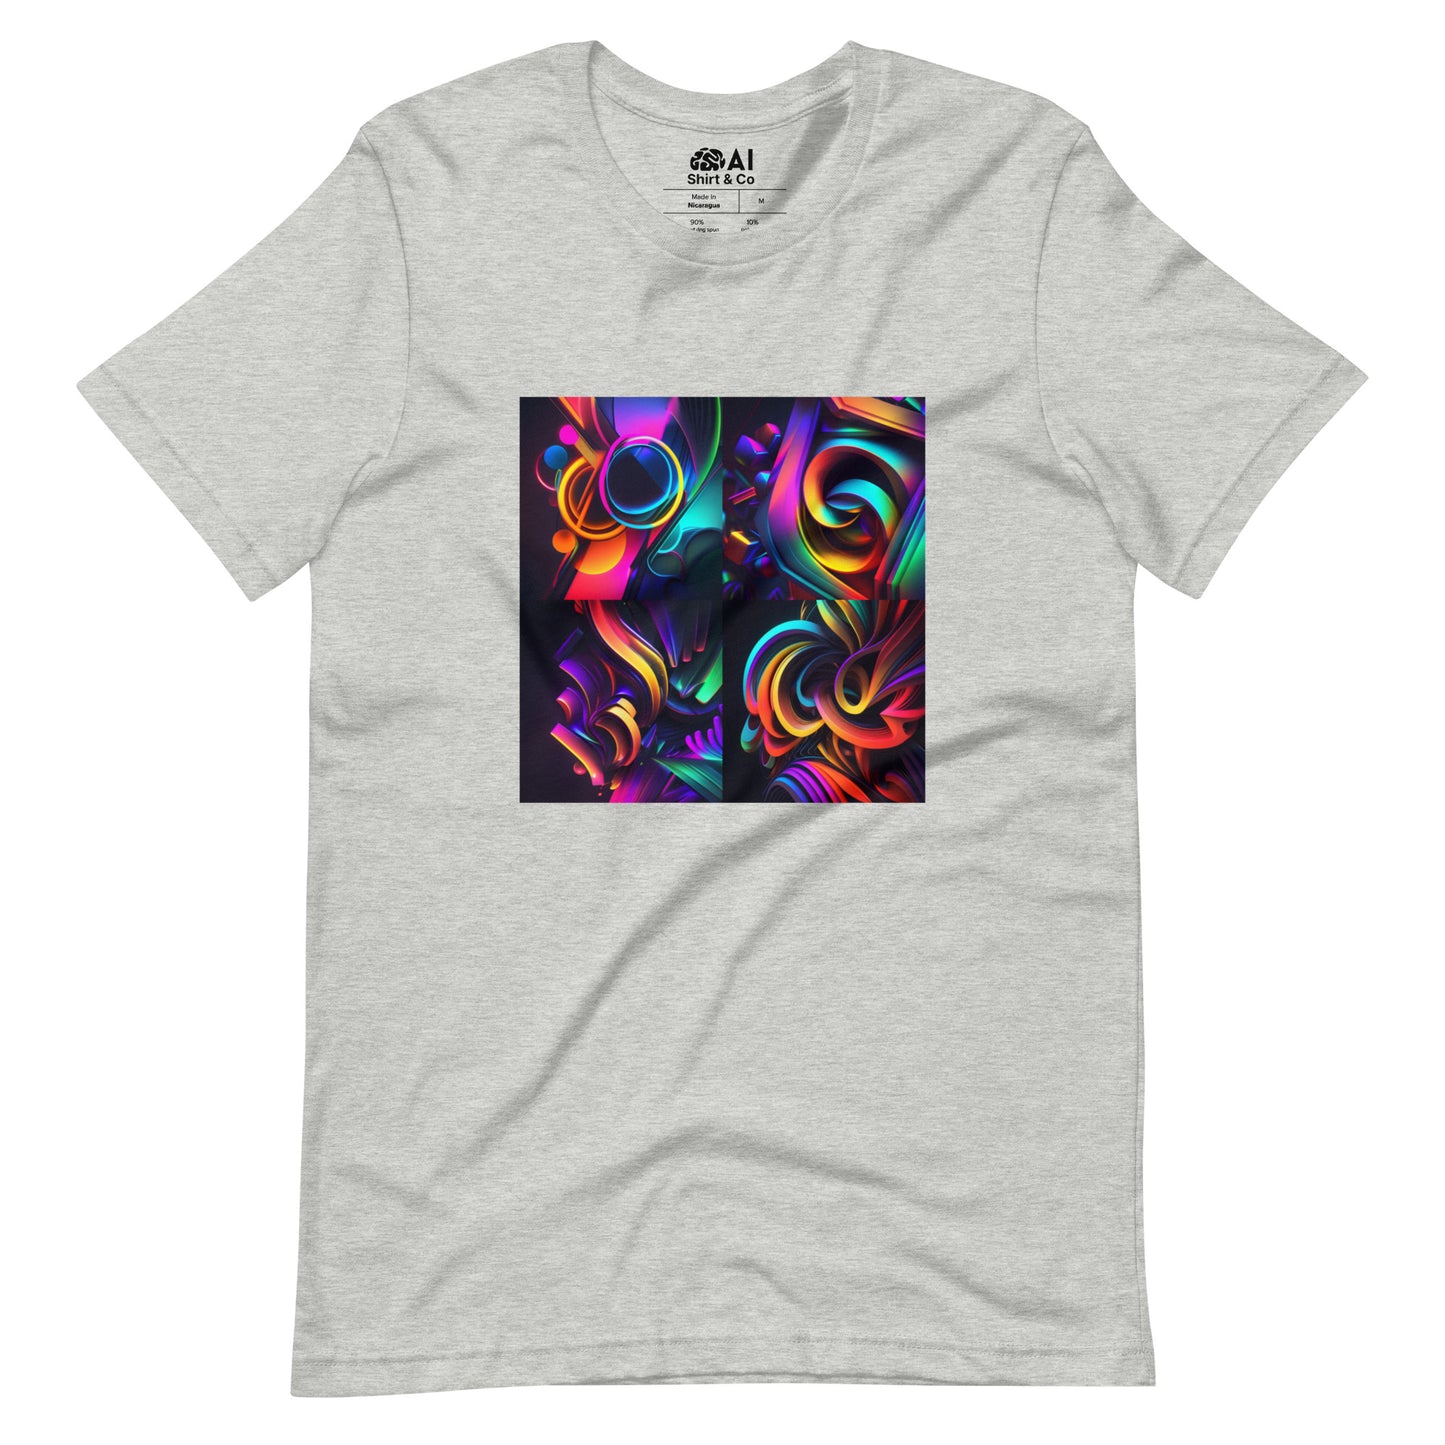 Colorful t-shirt